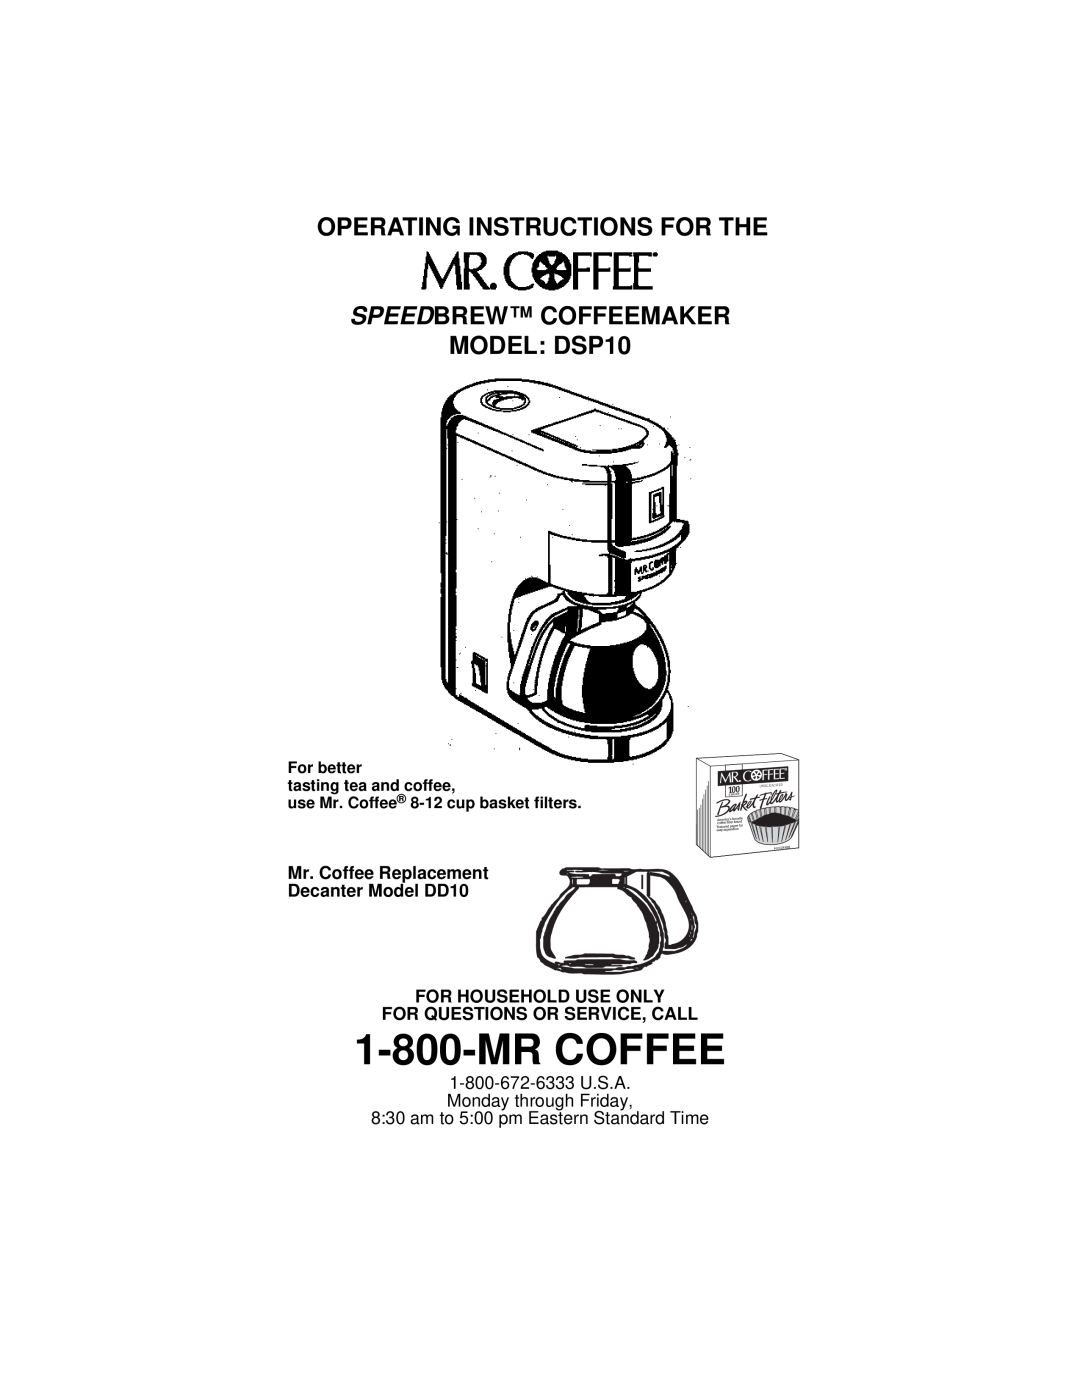 Mr. Coffee DSP10 manual Mr. Coffee Replacement Decanter Model DD10, For Household Use Only, For Questions Or Service, Call 